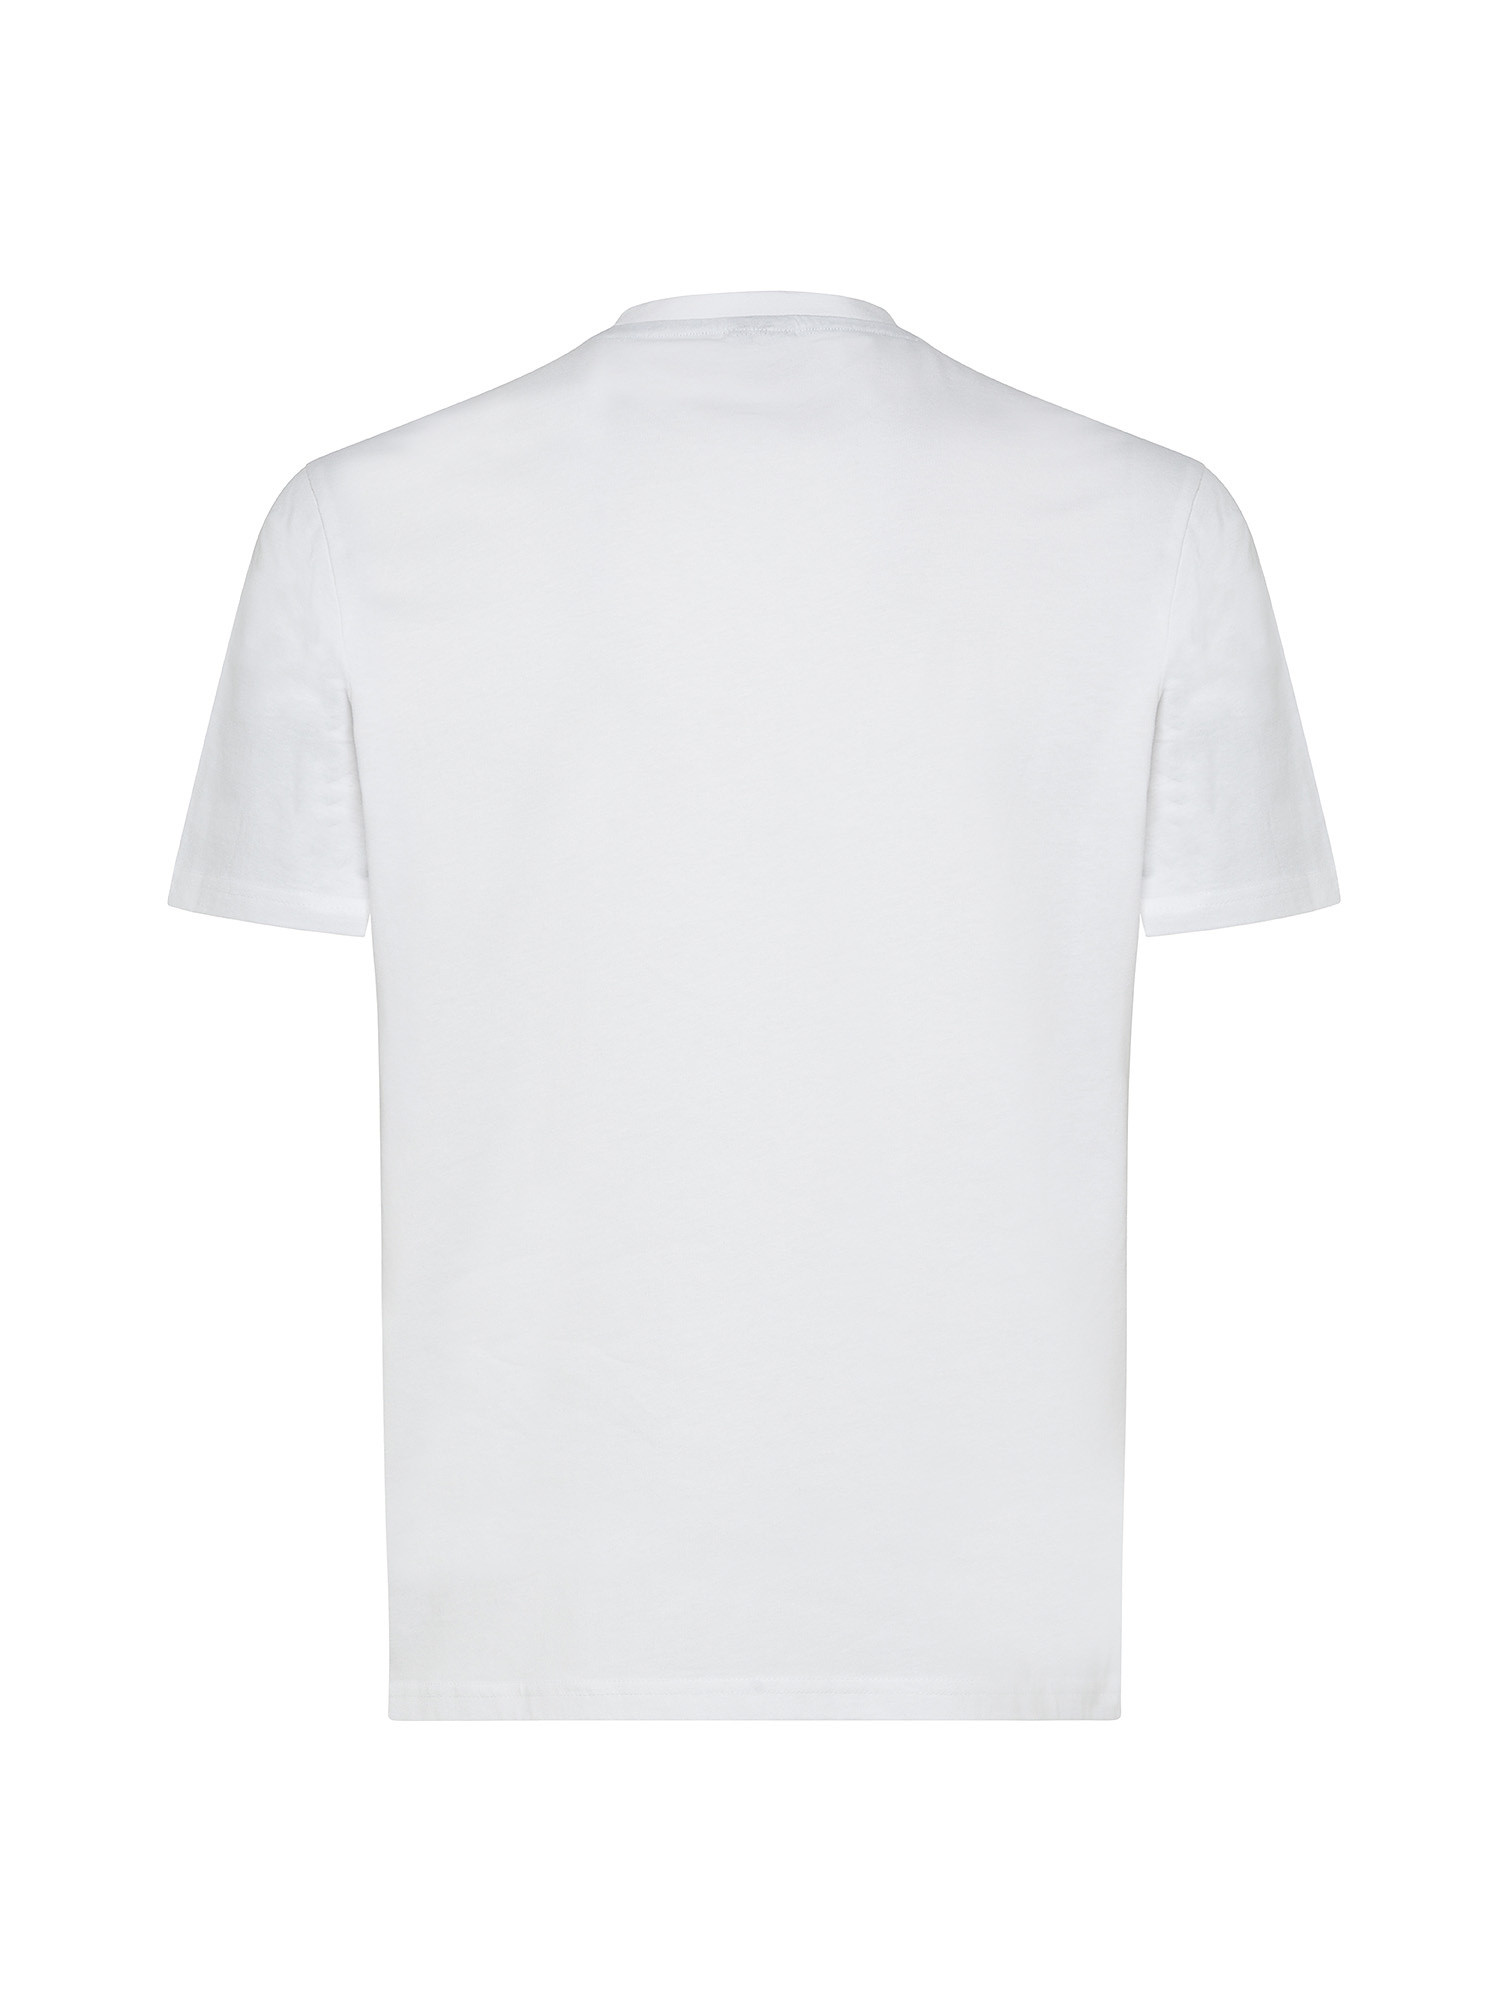 North sails - Organic cotton jersey T-shirt with printed maxi logo, White, large image number 1